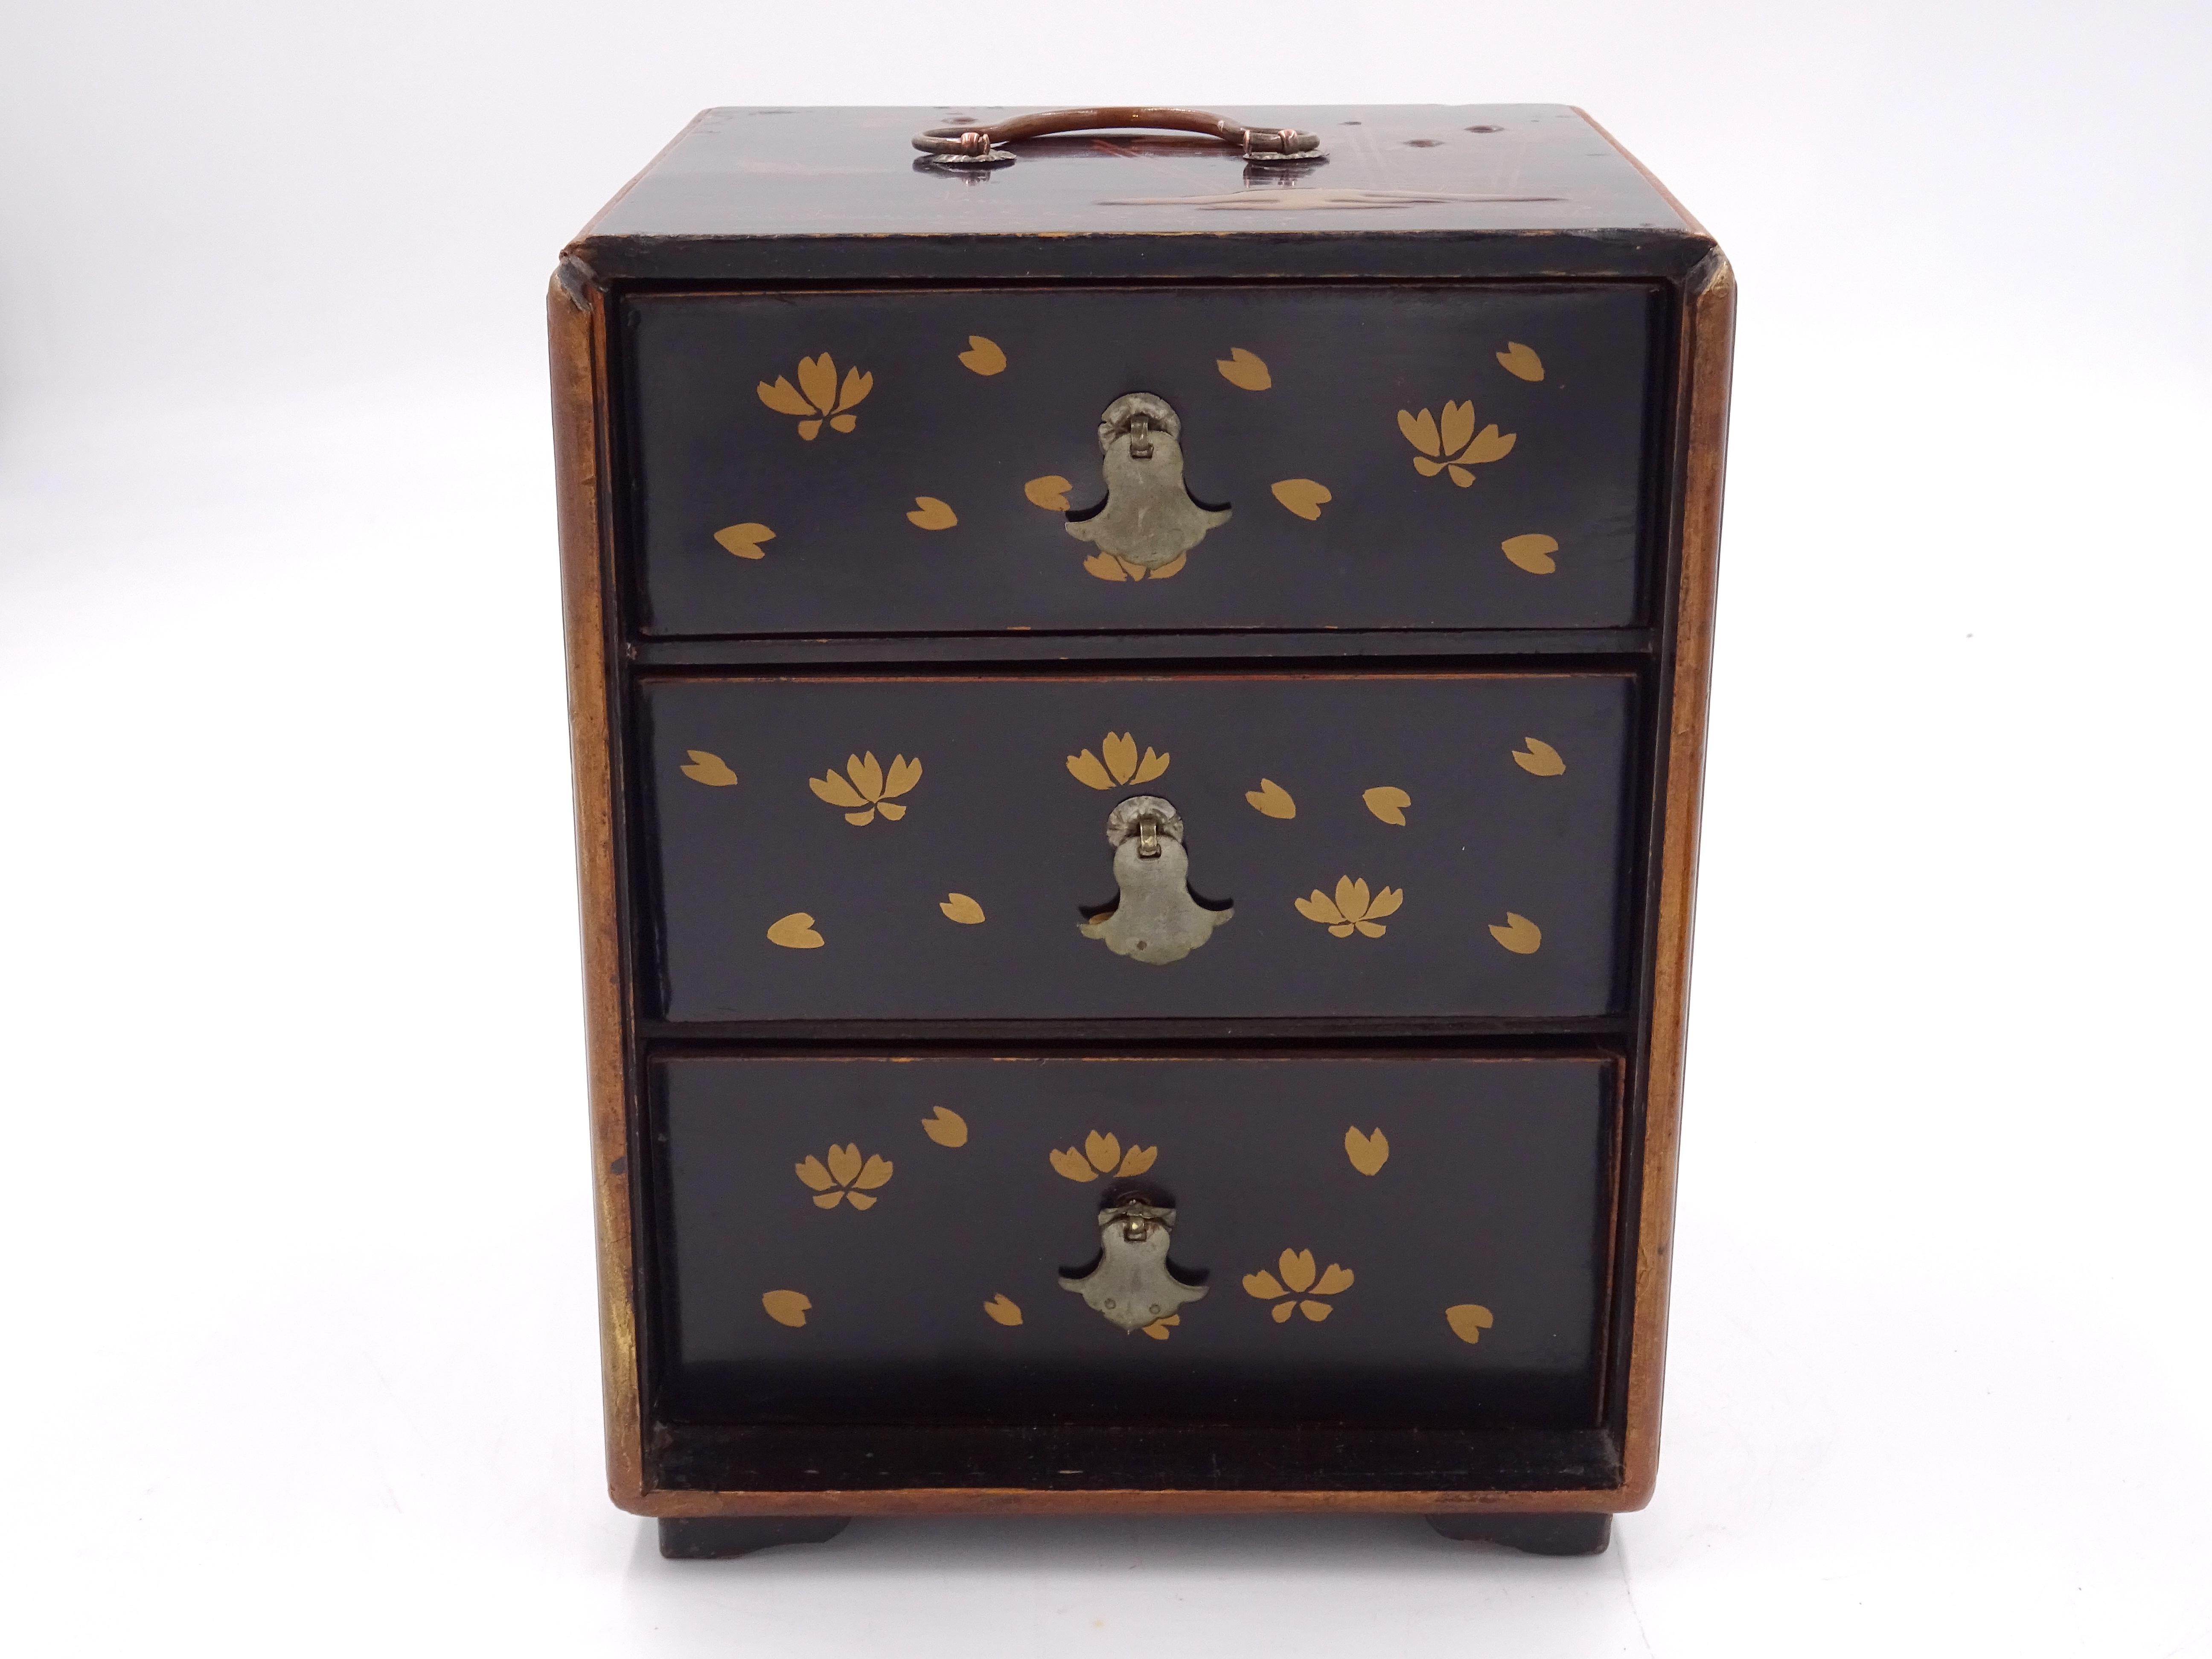 Three-drawer box of Chinese scope, late 19th century with floral decoration For Sale 6